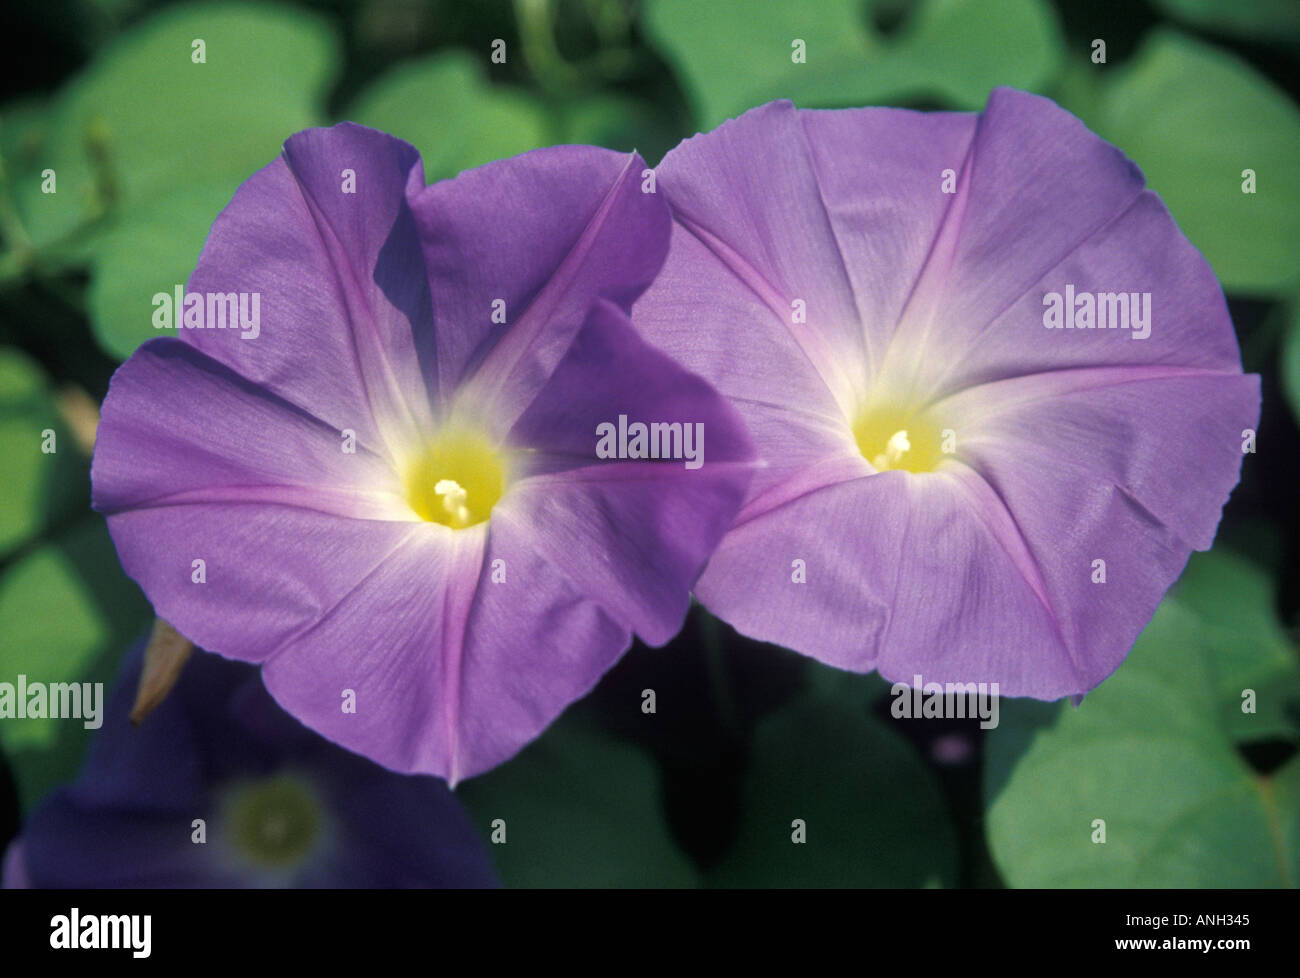 Page 3 Delicate Aesthetic Flower Head High Resolution Stock Photography And Images Alamy